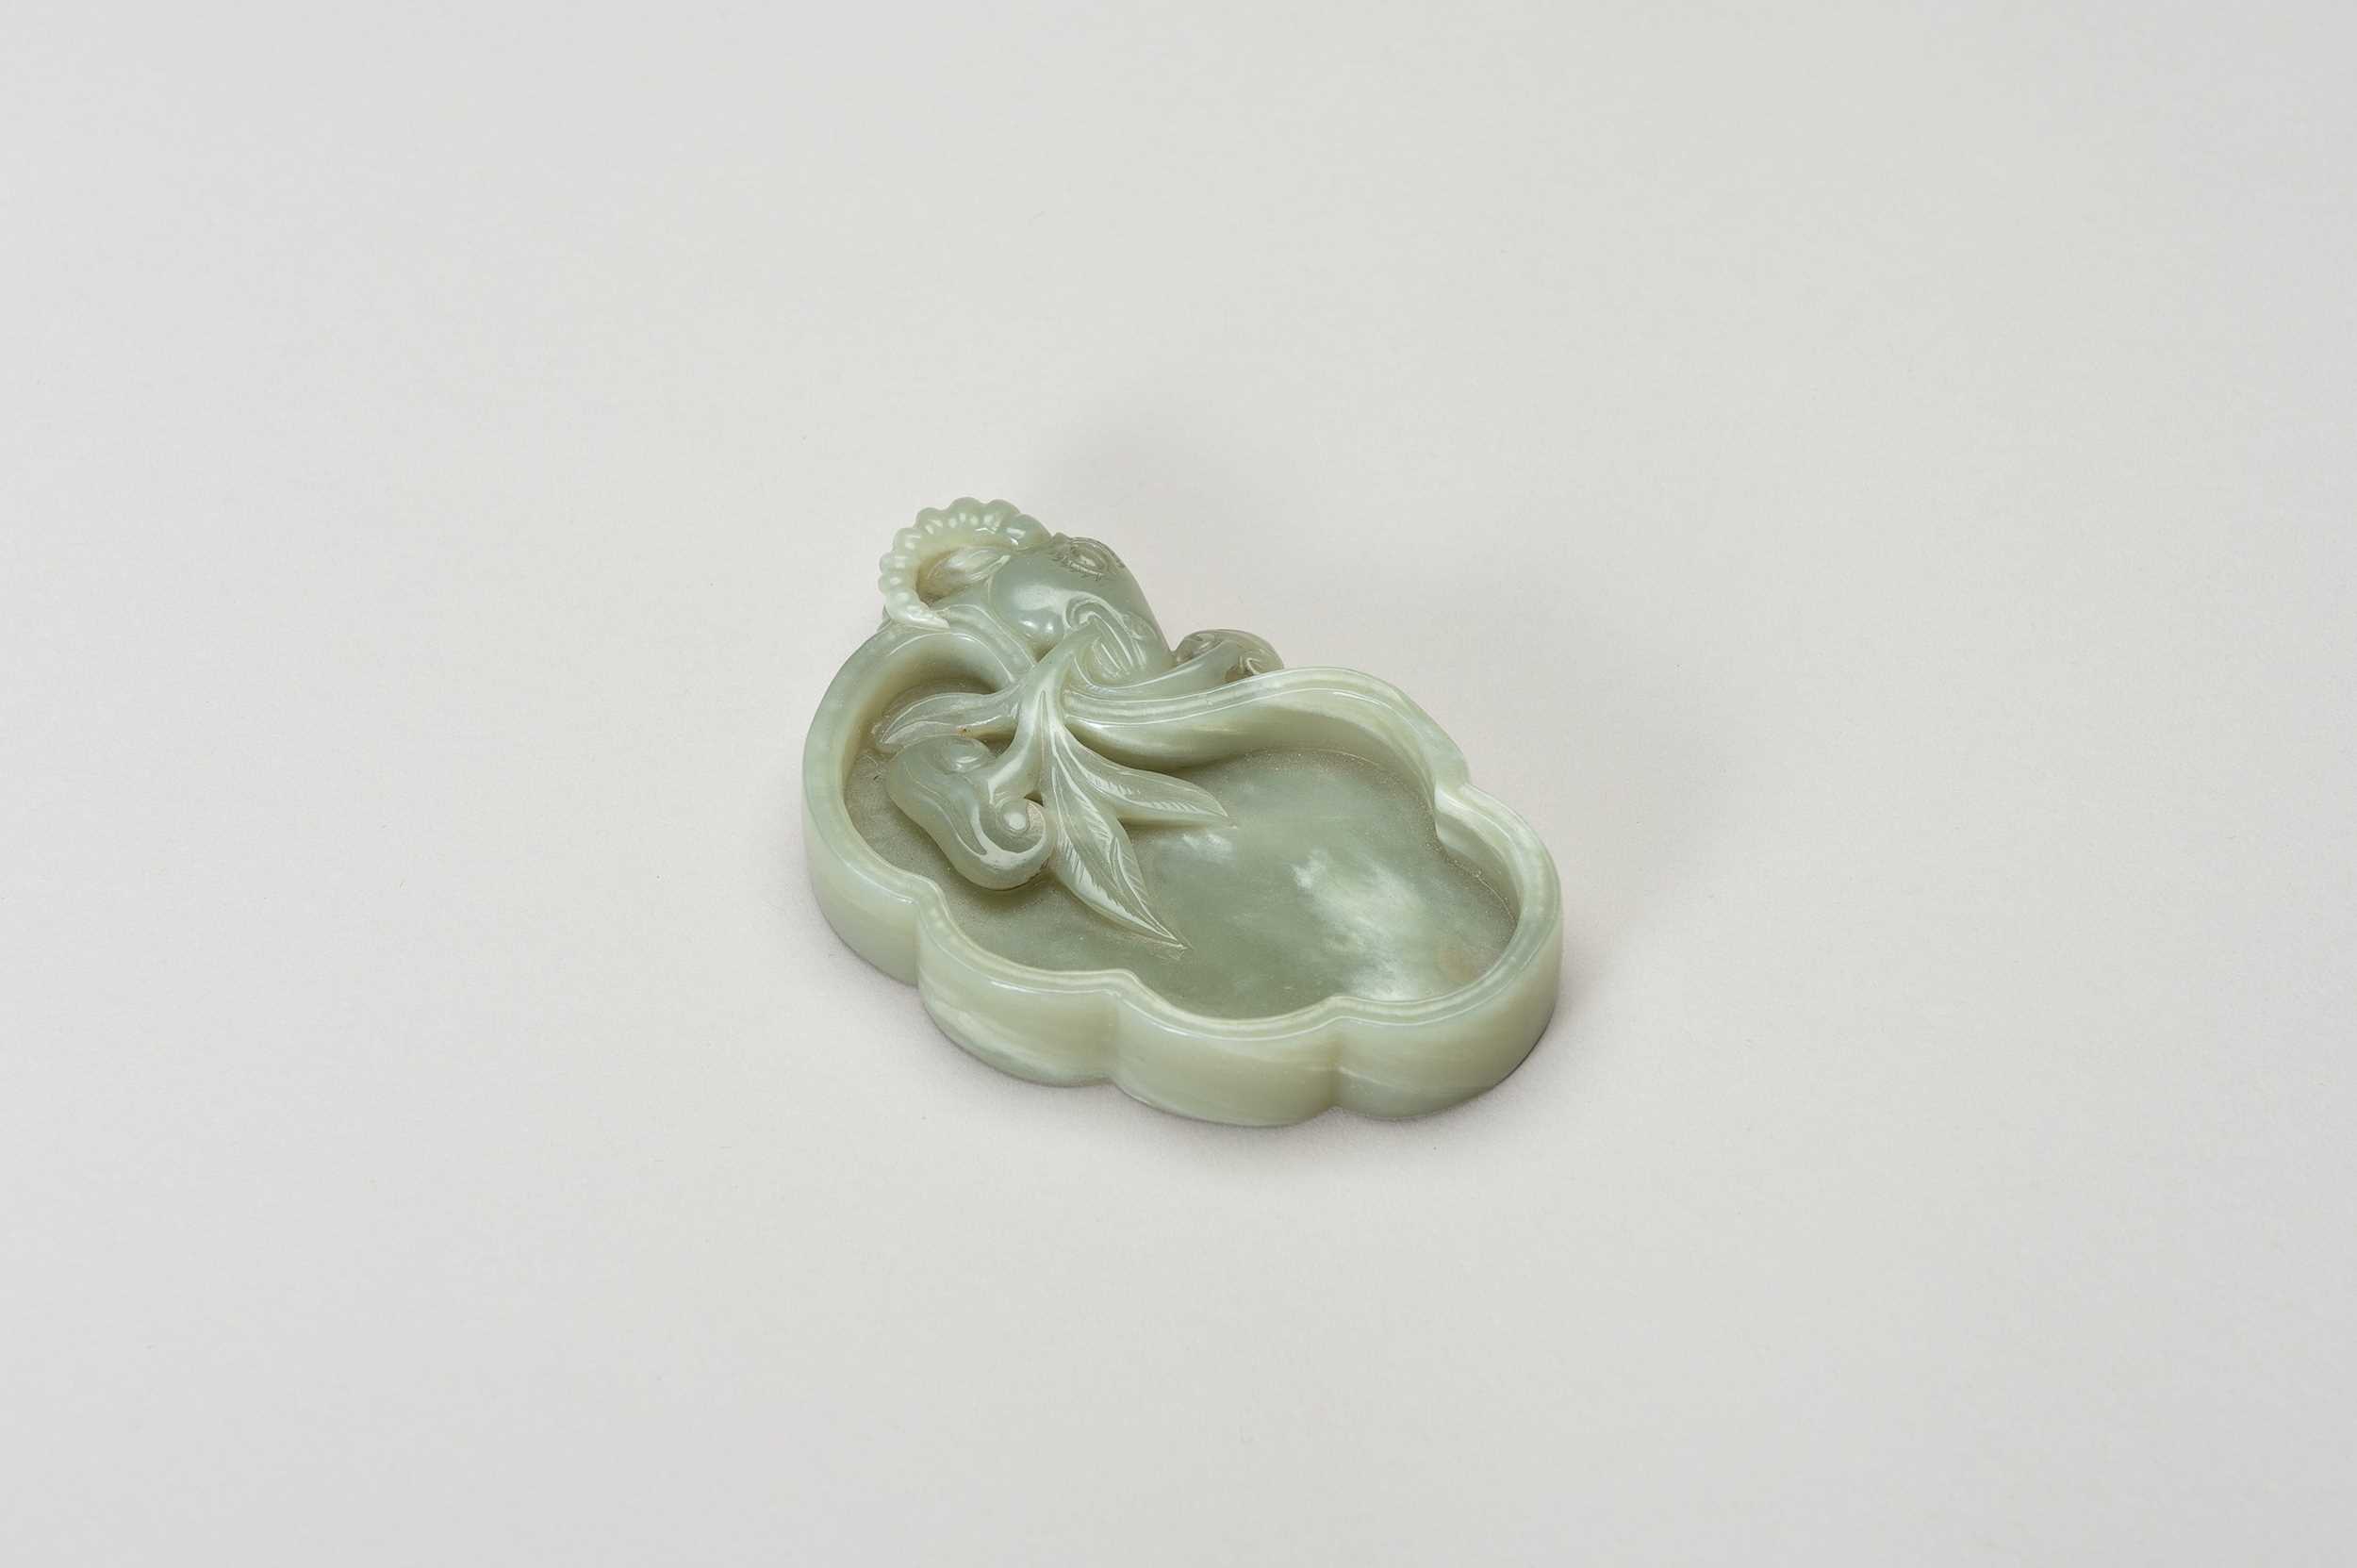 Lot 249 - A CARVED CELADON JADE LINGZHI-FORM BRUSH WASHER WITH A RAM